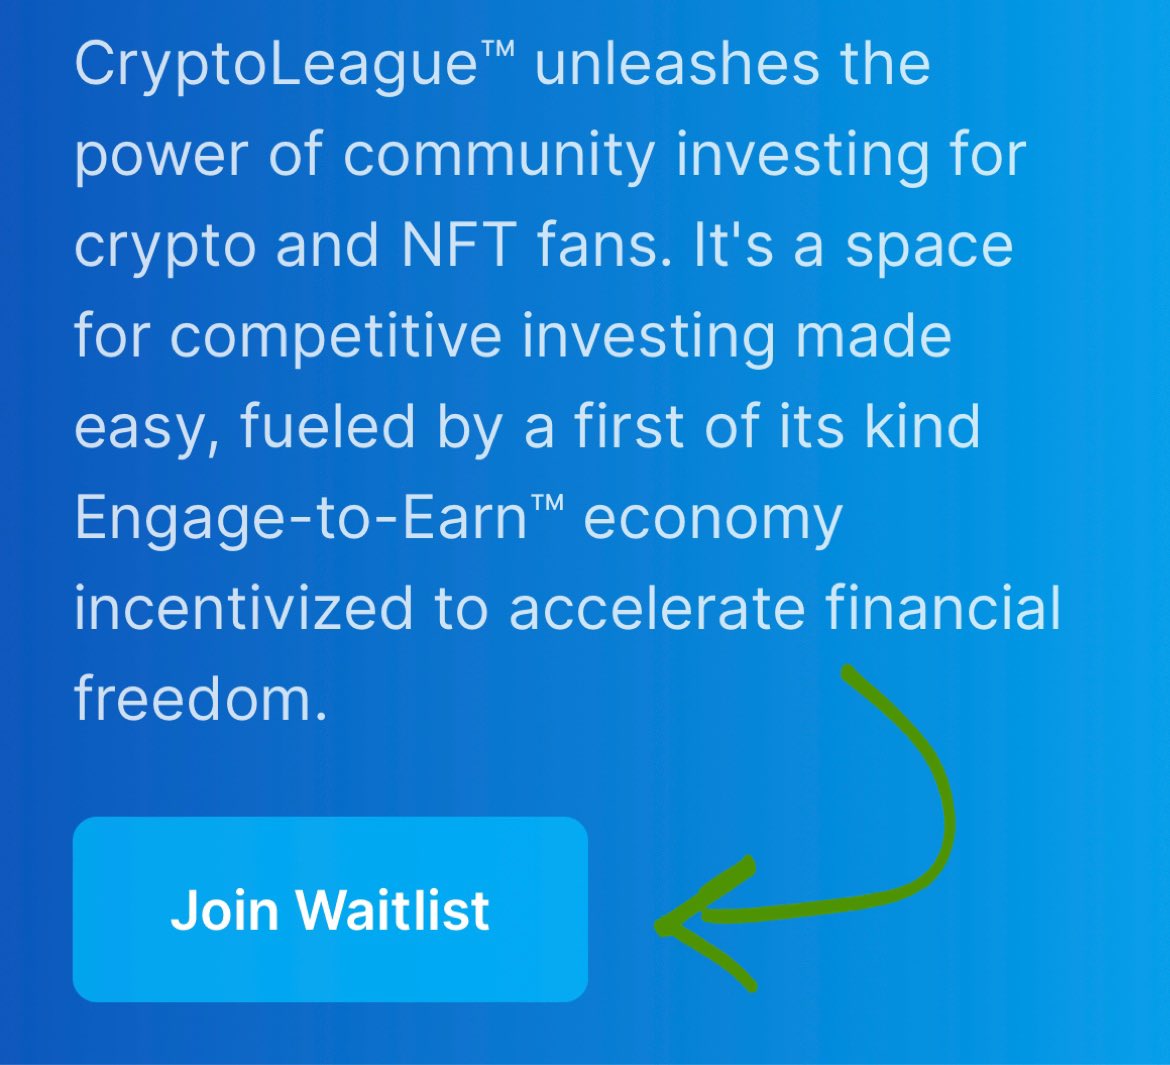 Unlock the power of community investing with CryptoLeague!   

Join the waitlist for exclusive news and insider updates.

cryptoleague.org 

#cryptoleague #communityinvesting